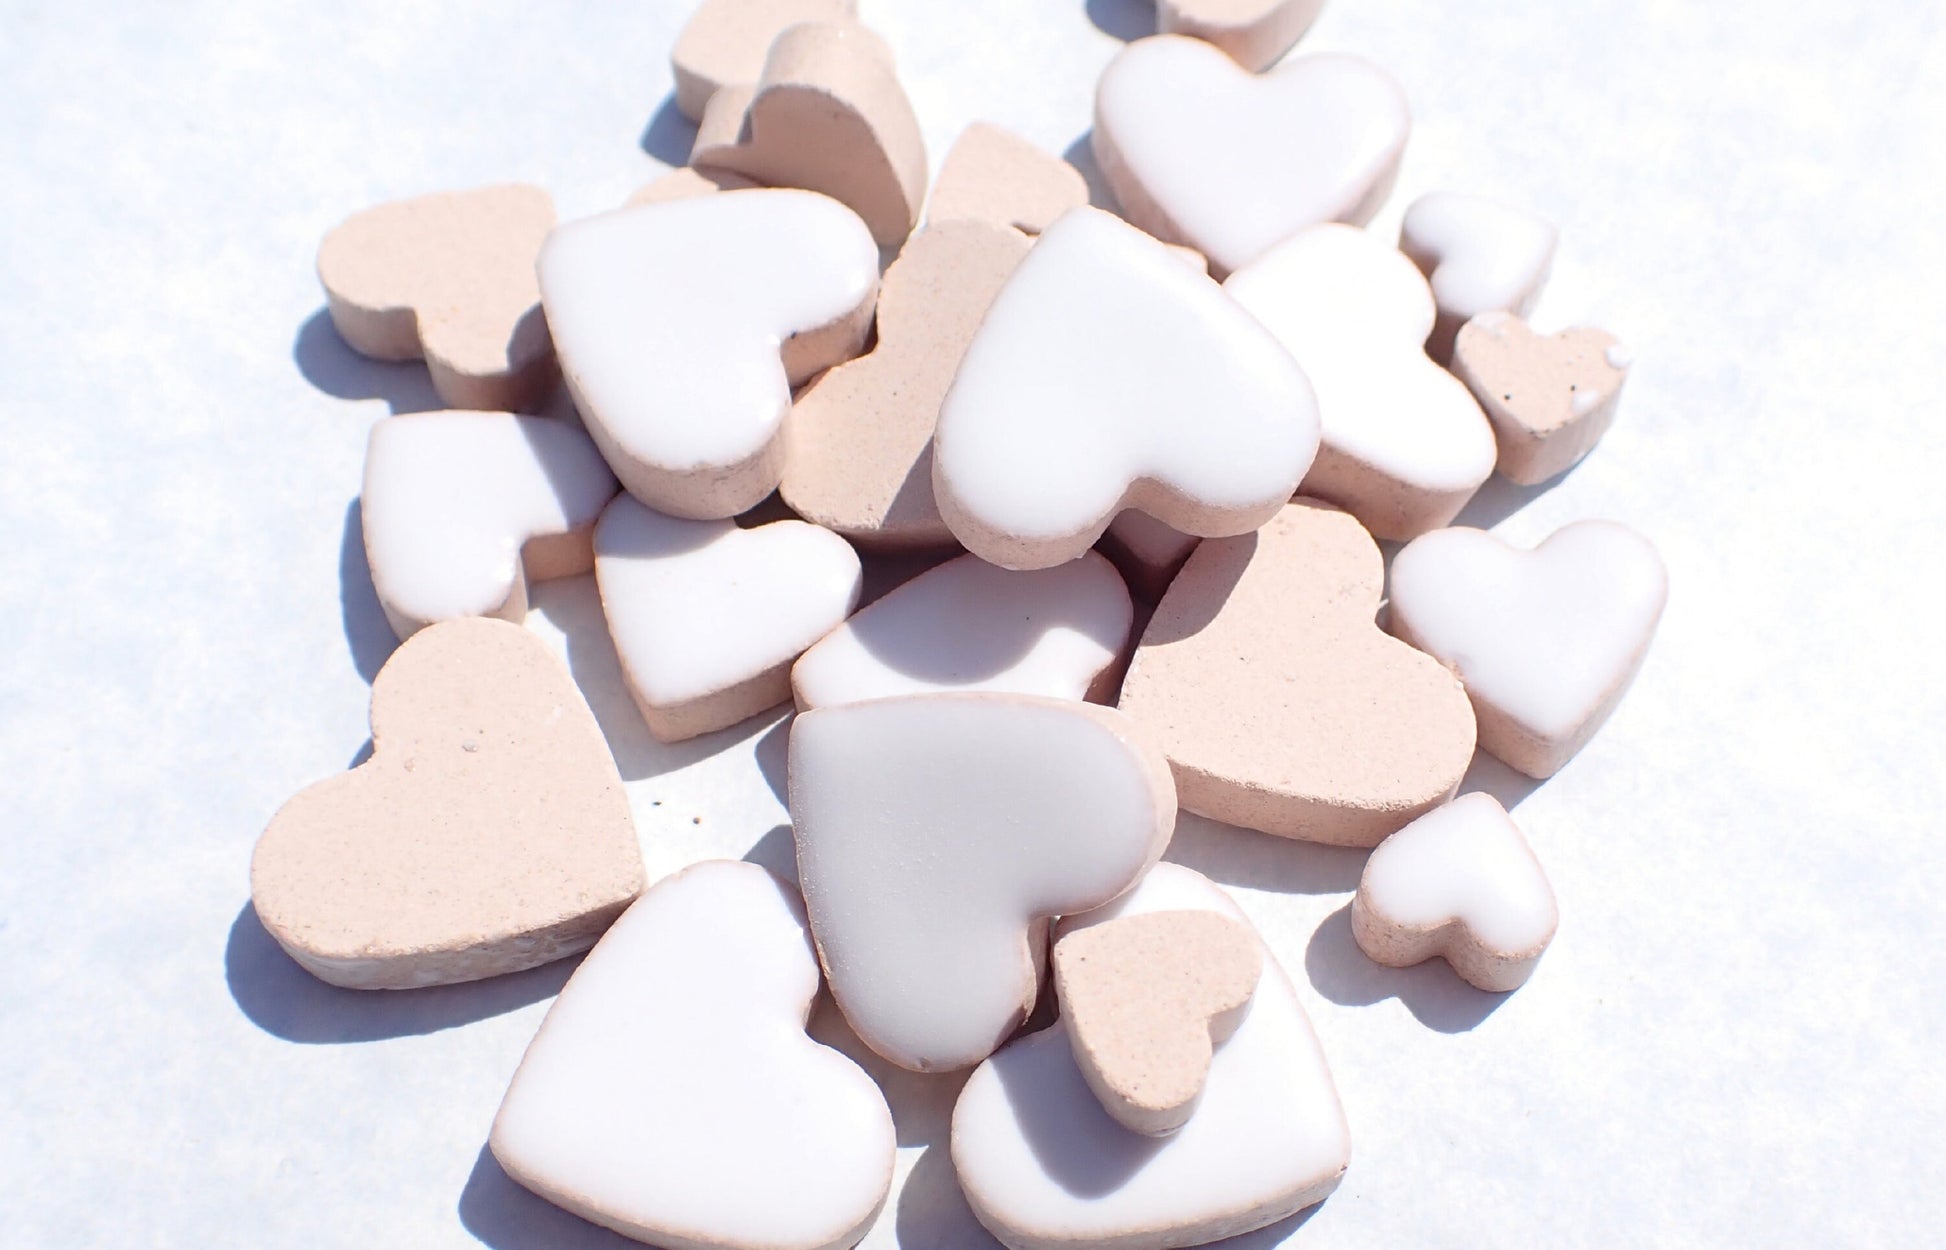 White Hearts Mosaic Tiles - 50g Ceramic in Mix of 3 Sizes - 20mm, 15mm, 10mm